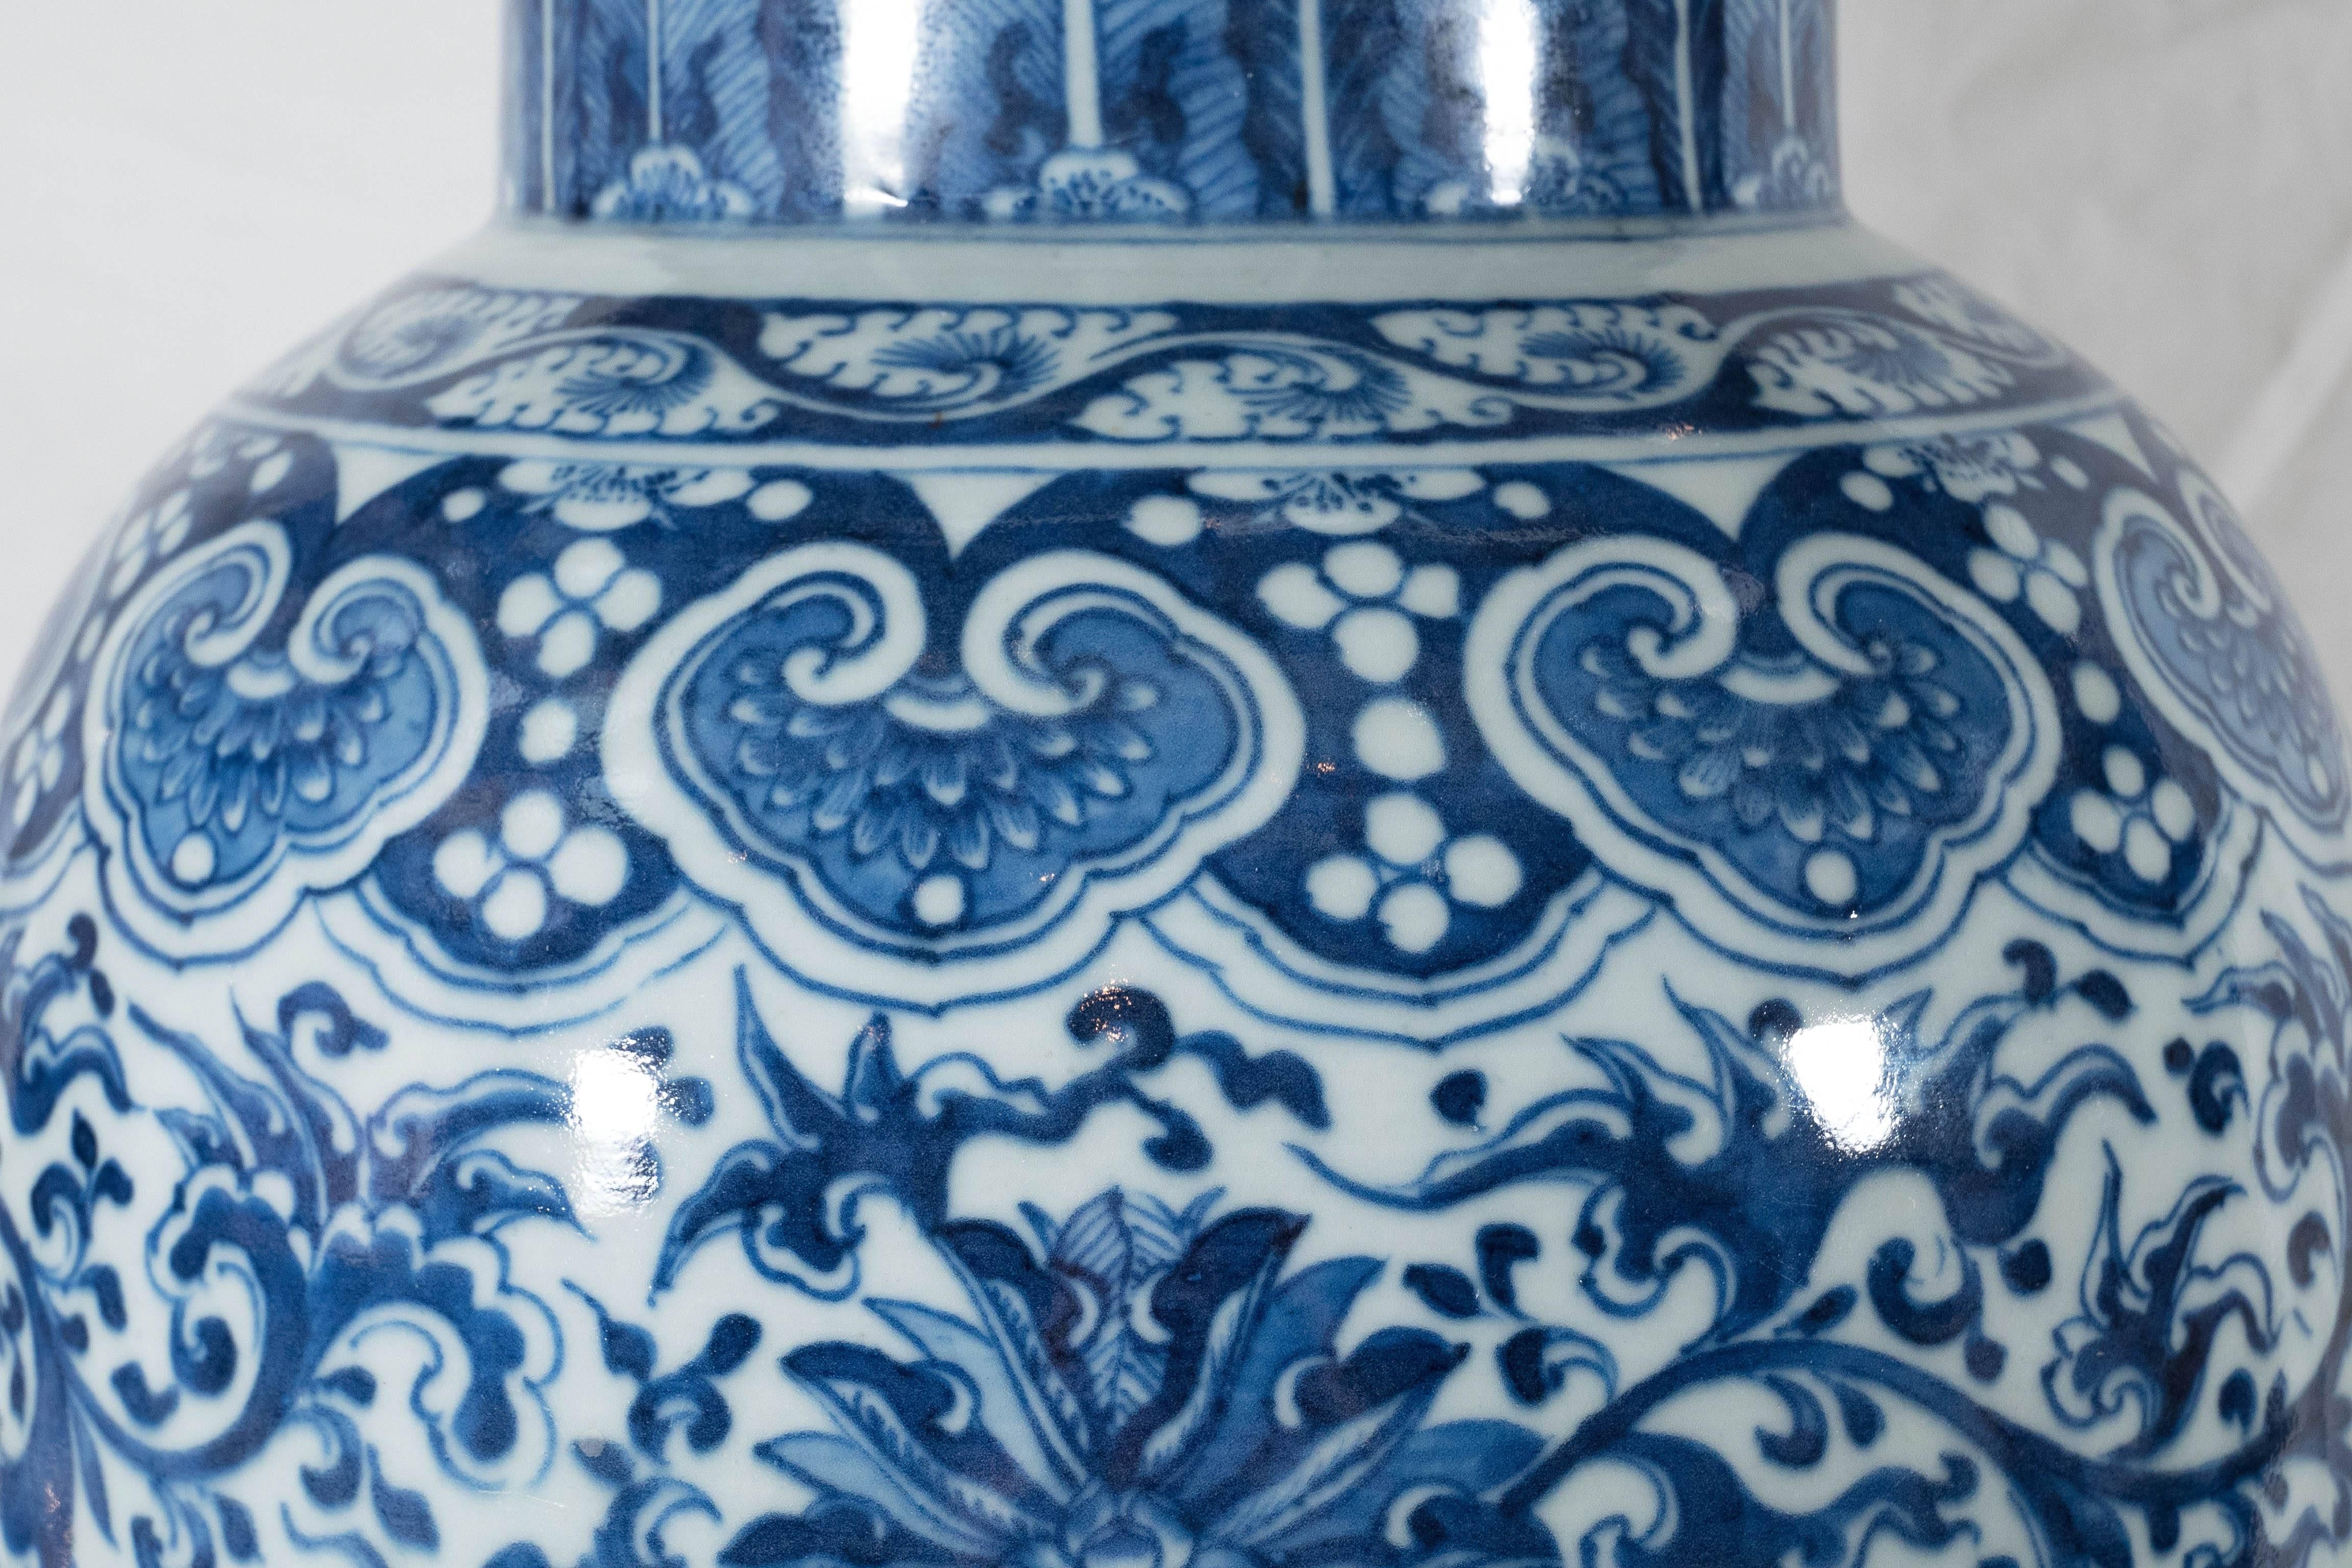 A pair of beautiful Chinese blue and white porcelain vases each hand-painted in cobalt blue with traditional Kangxi design showing scrolling lotus between bands of cloud collars. The form is tall and slender. The neck decorated with acanthus leaves.